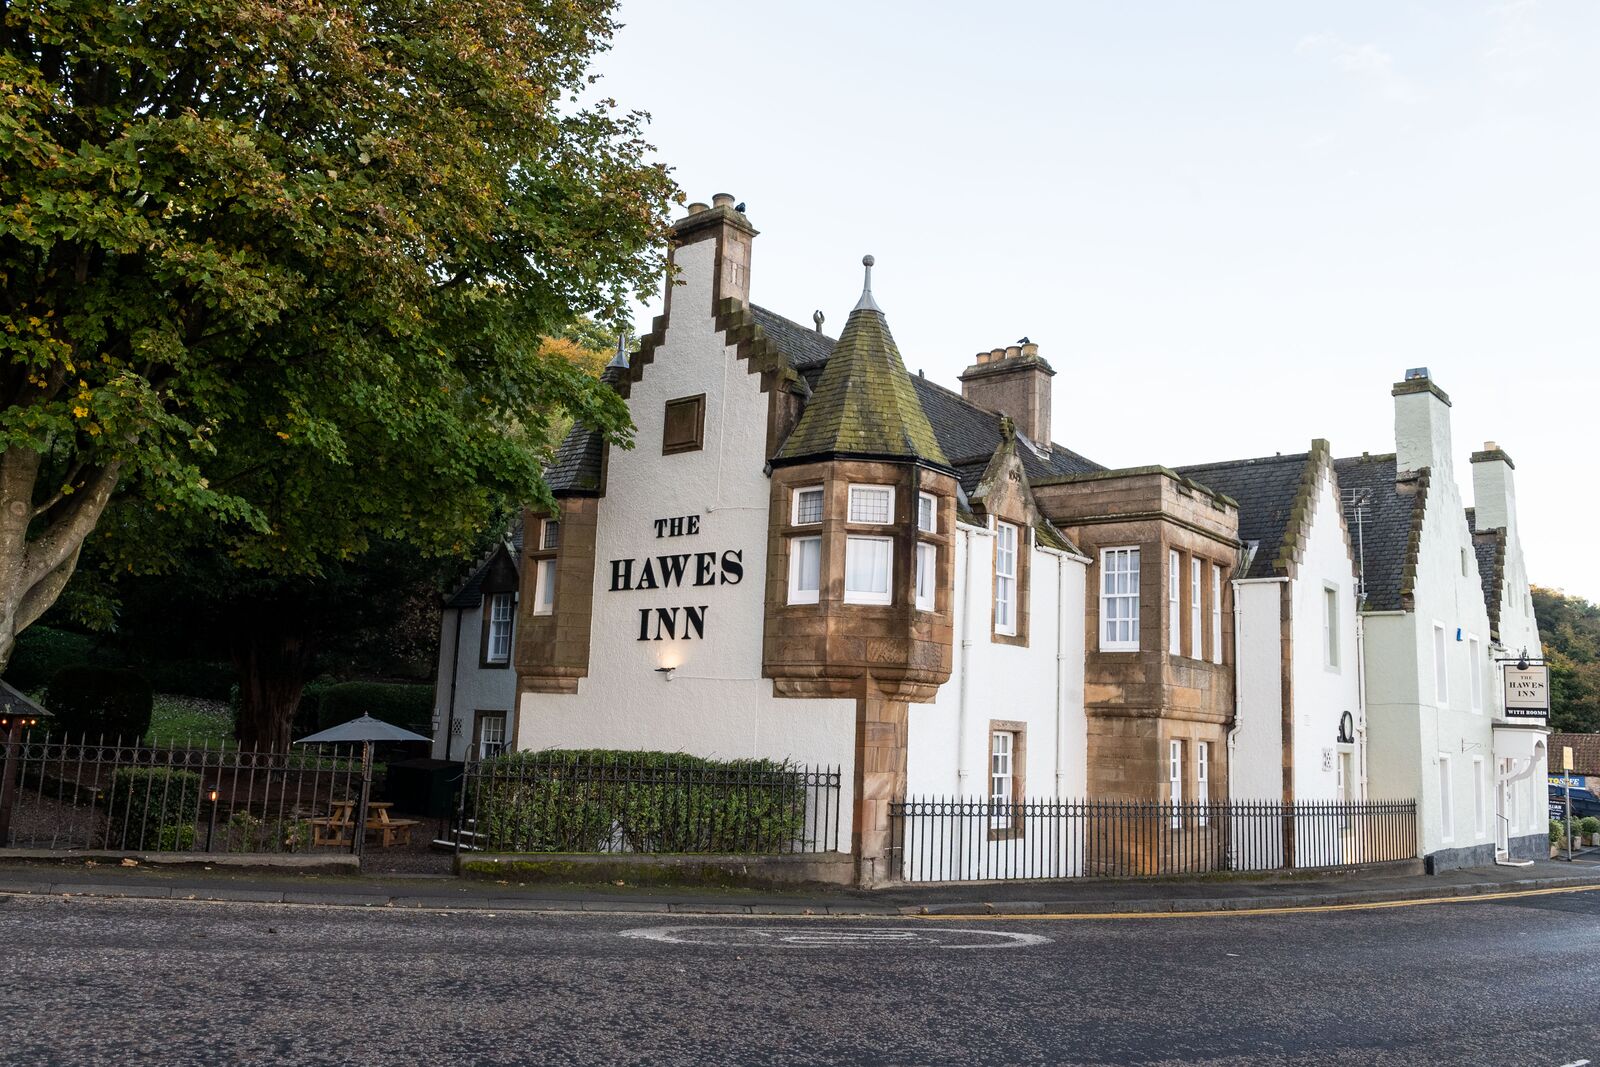 Photograph of exterior of The Hawes Inn